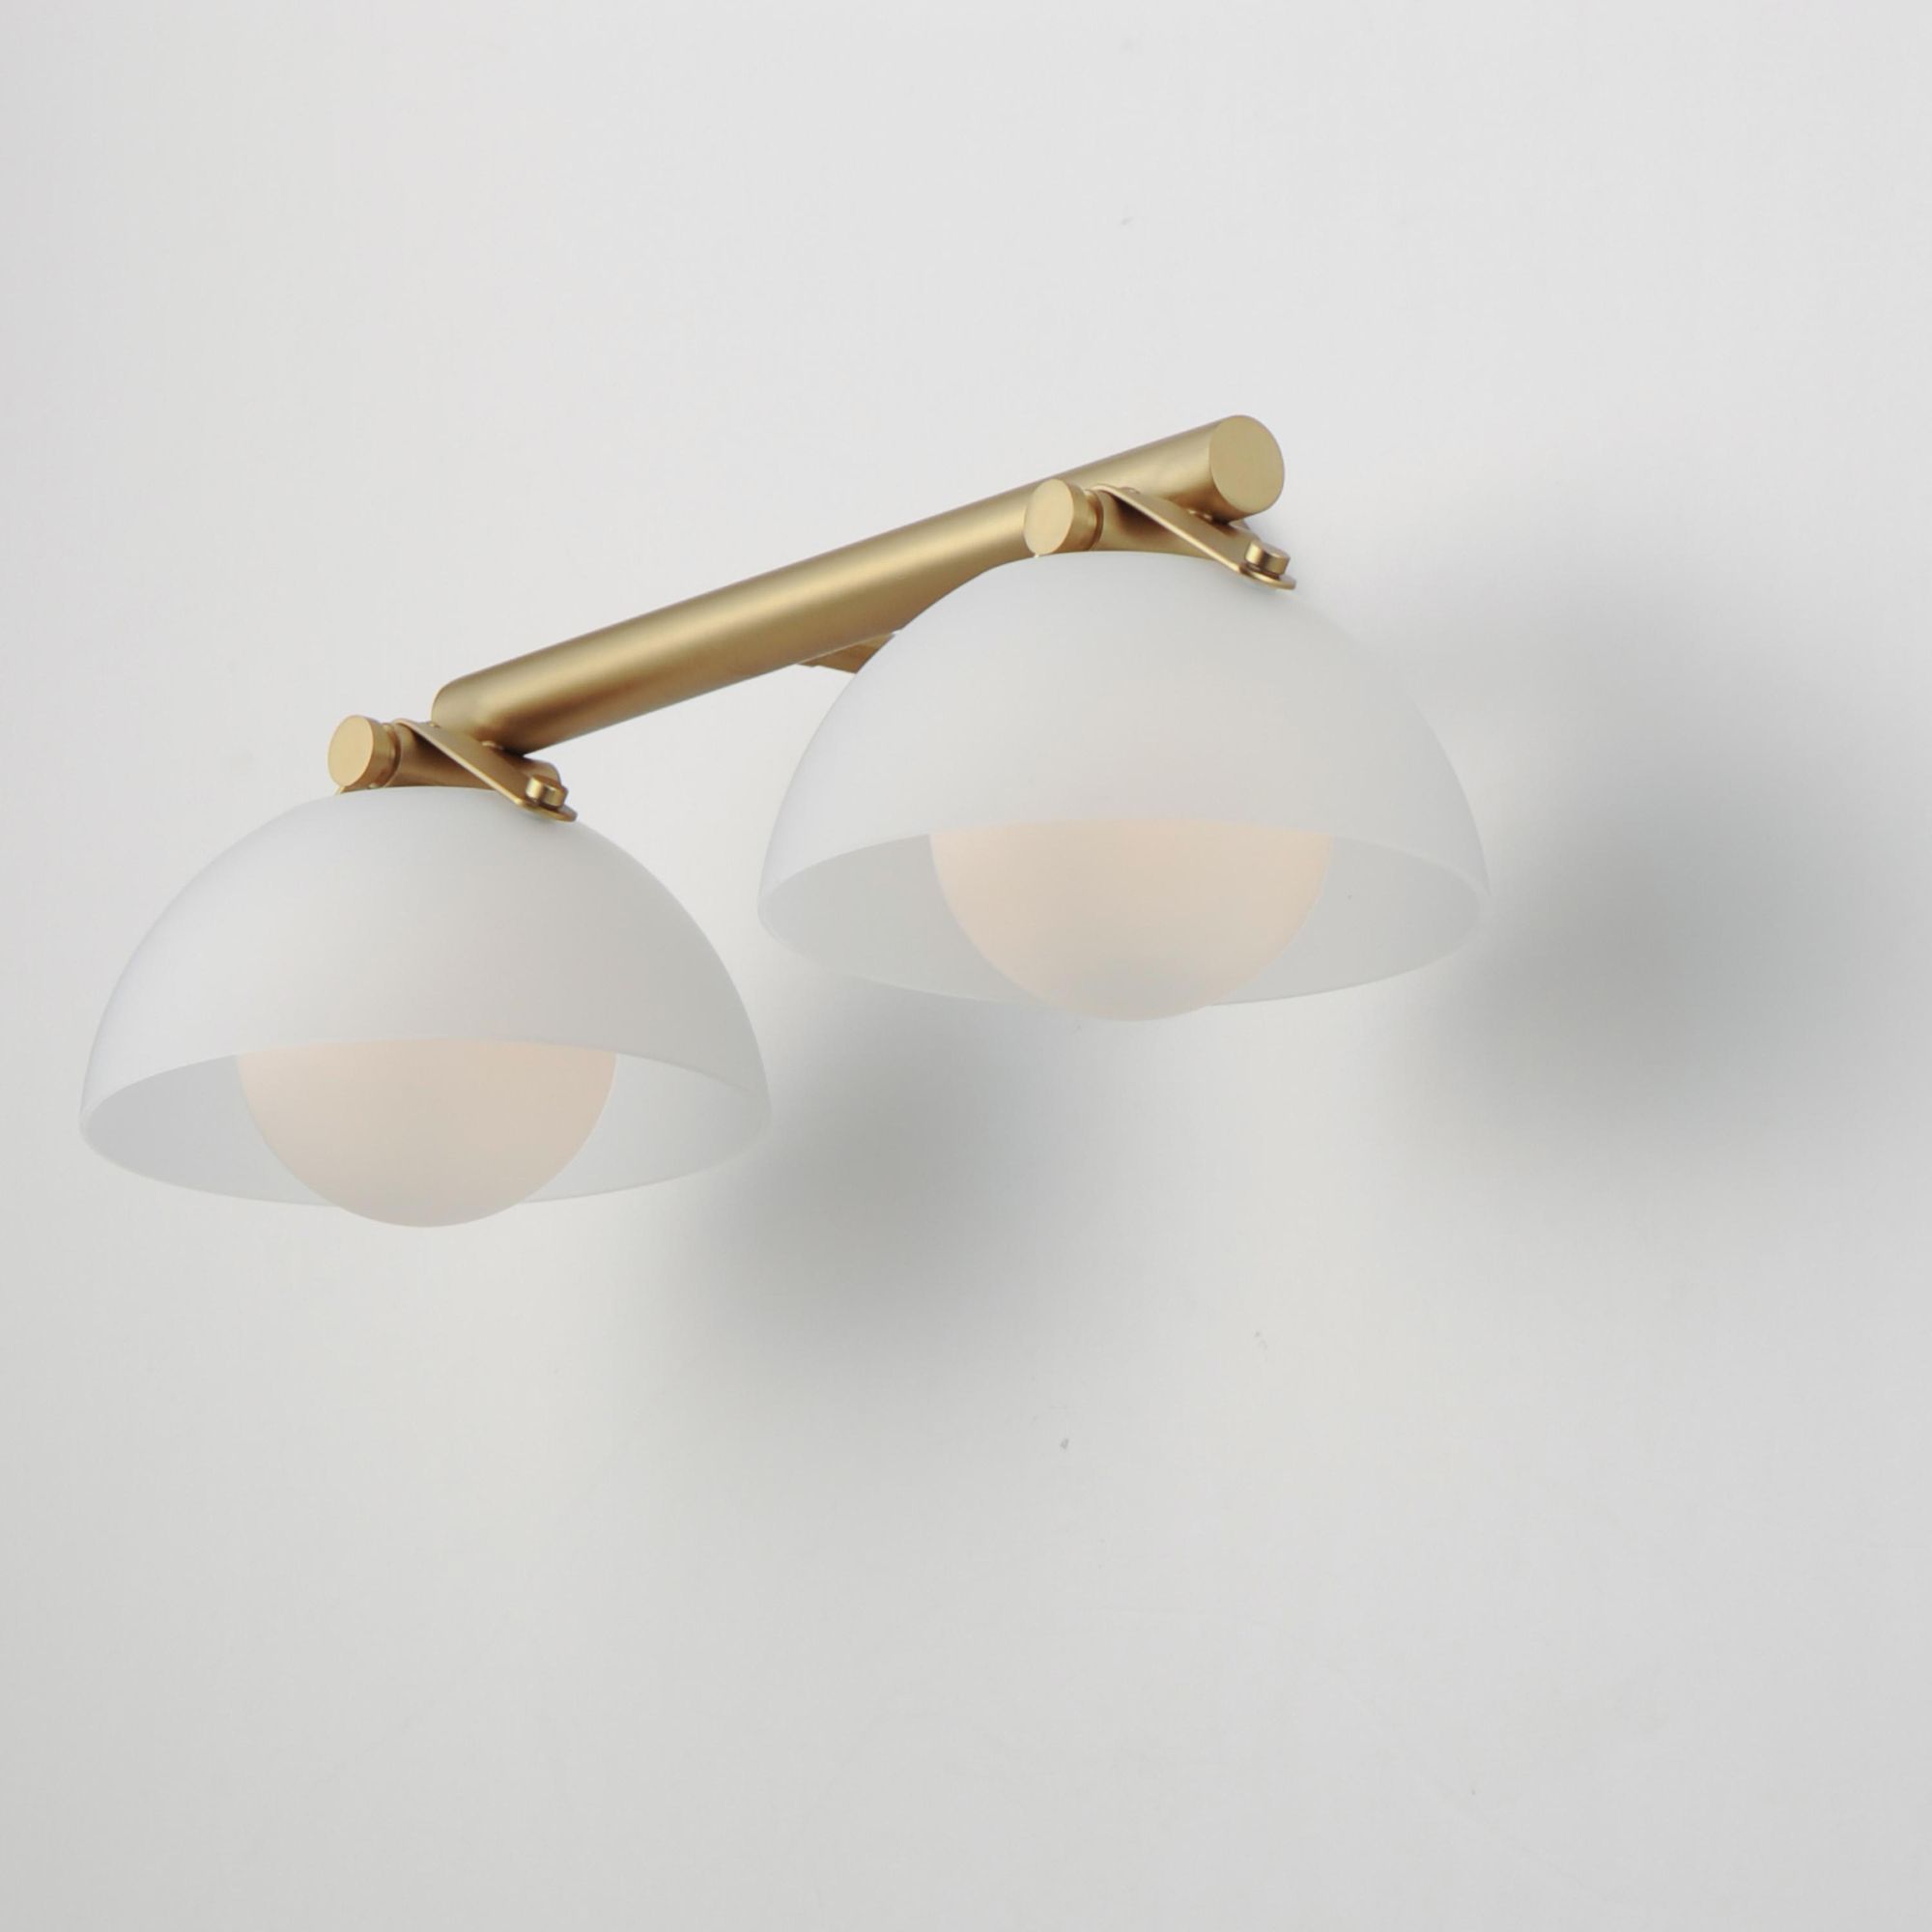 Studio M SM31002FTNAB Domain 2-Light Wall Sconce - Frost/Brass in Natural Aged Brass by Mat Sanders